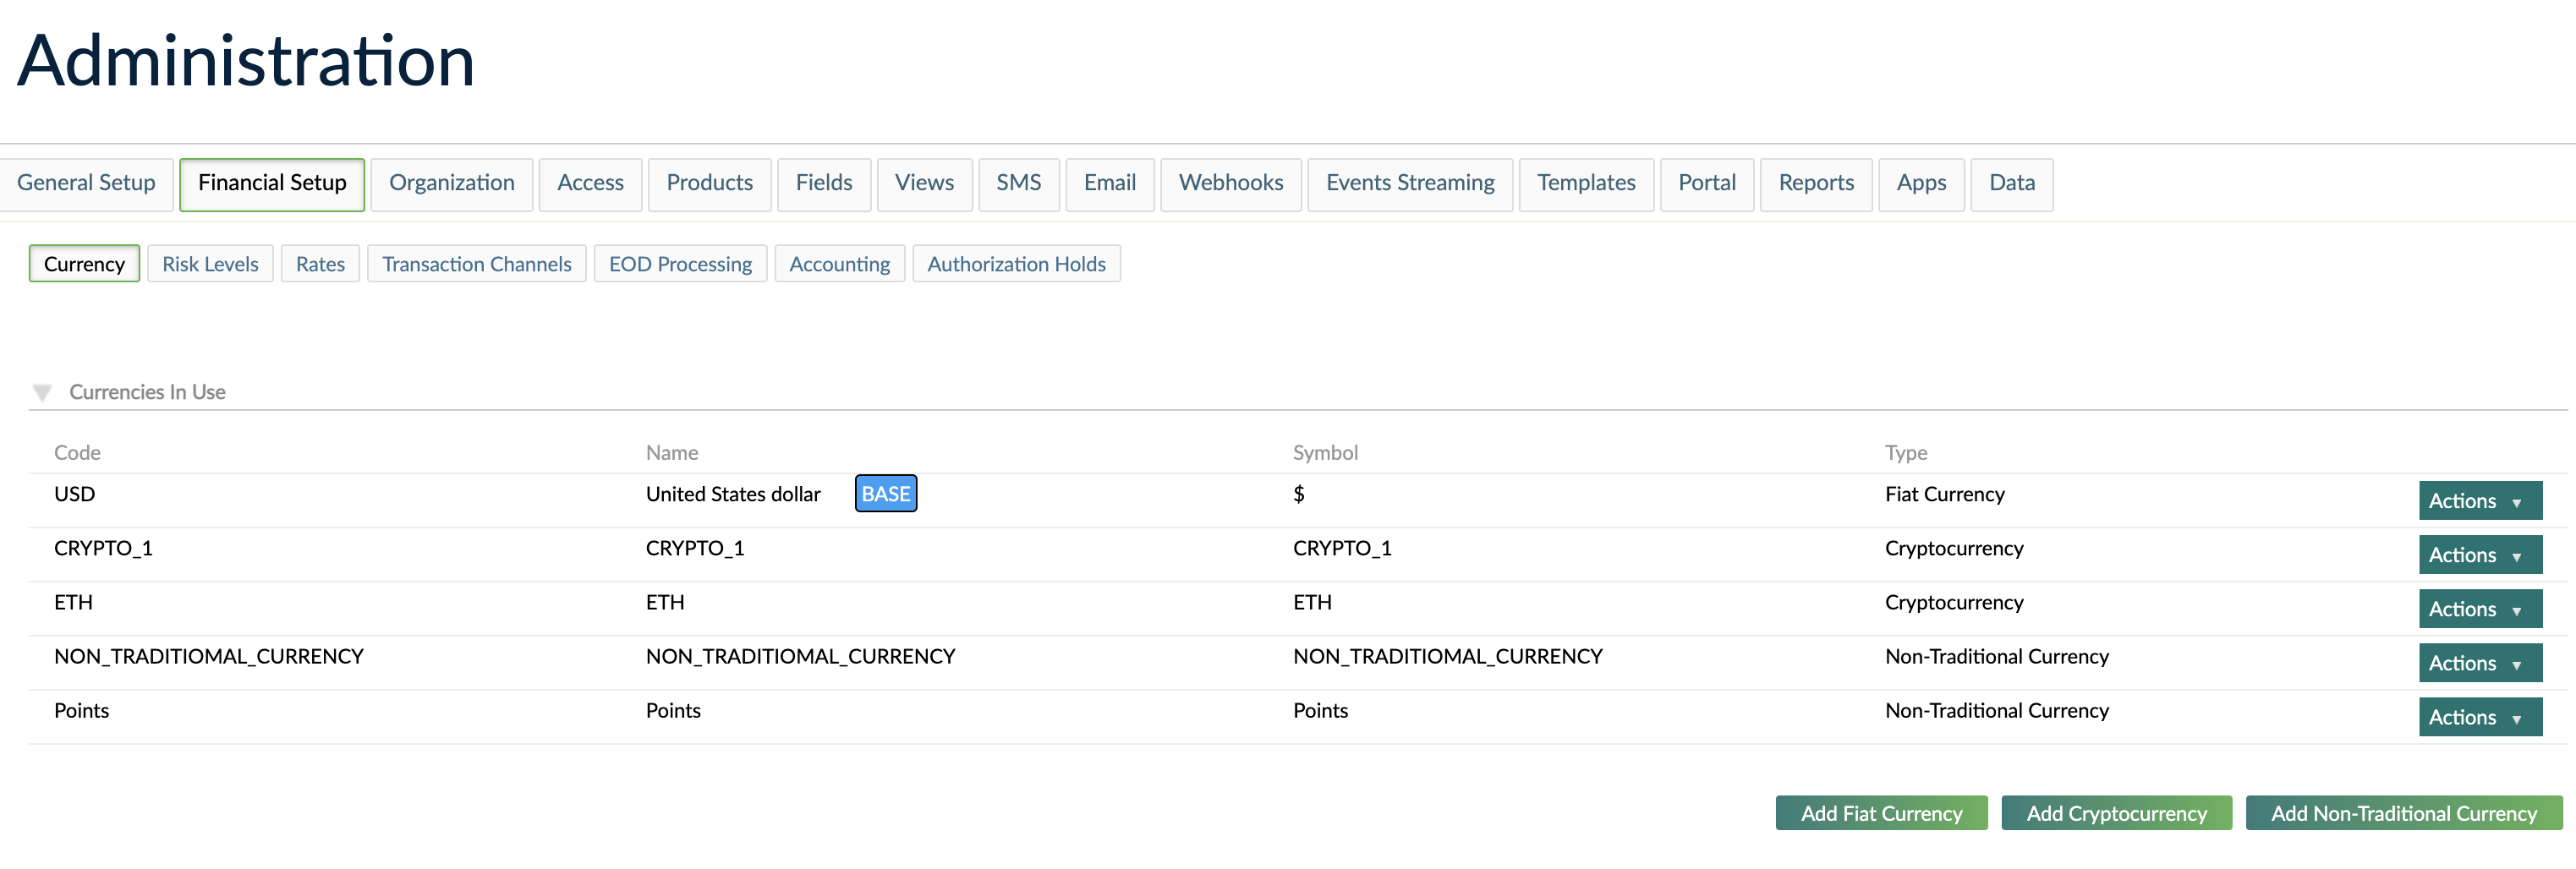 Currency tab under Financial Setup in Administration screen.